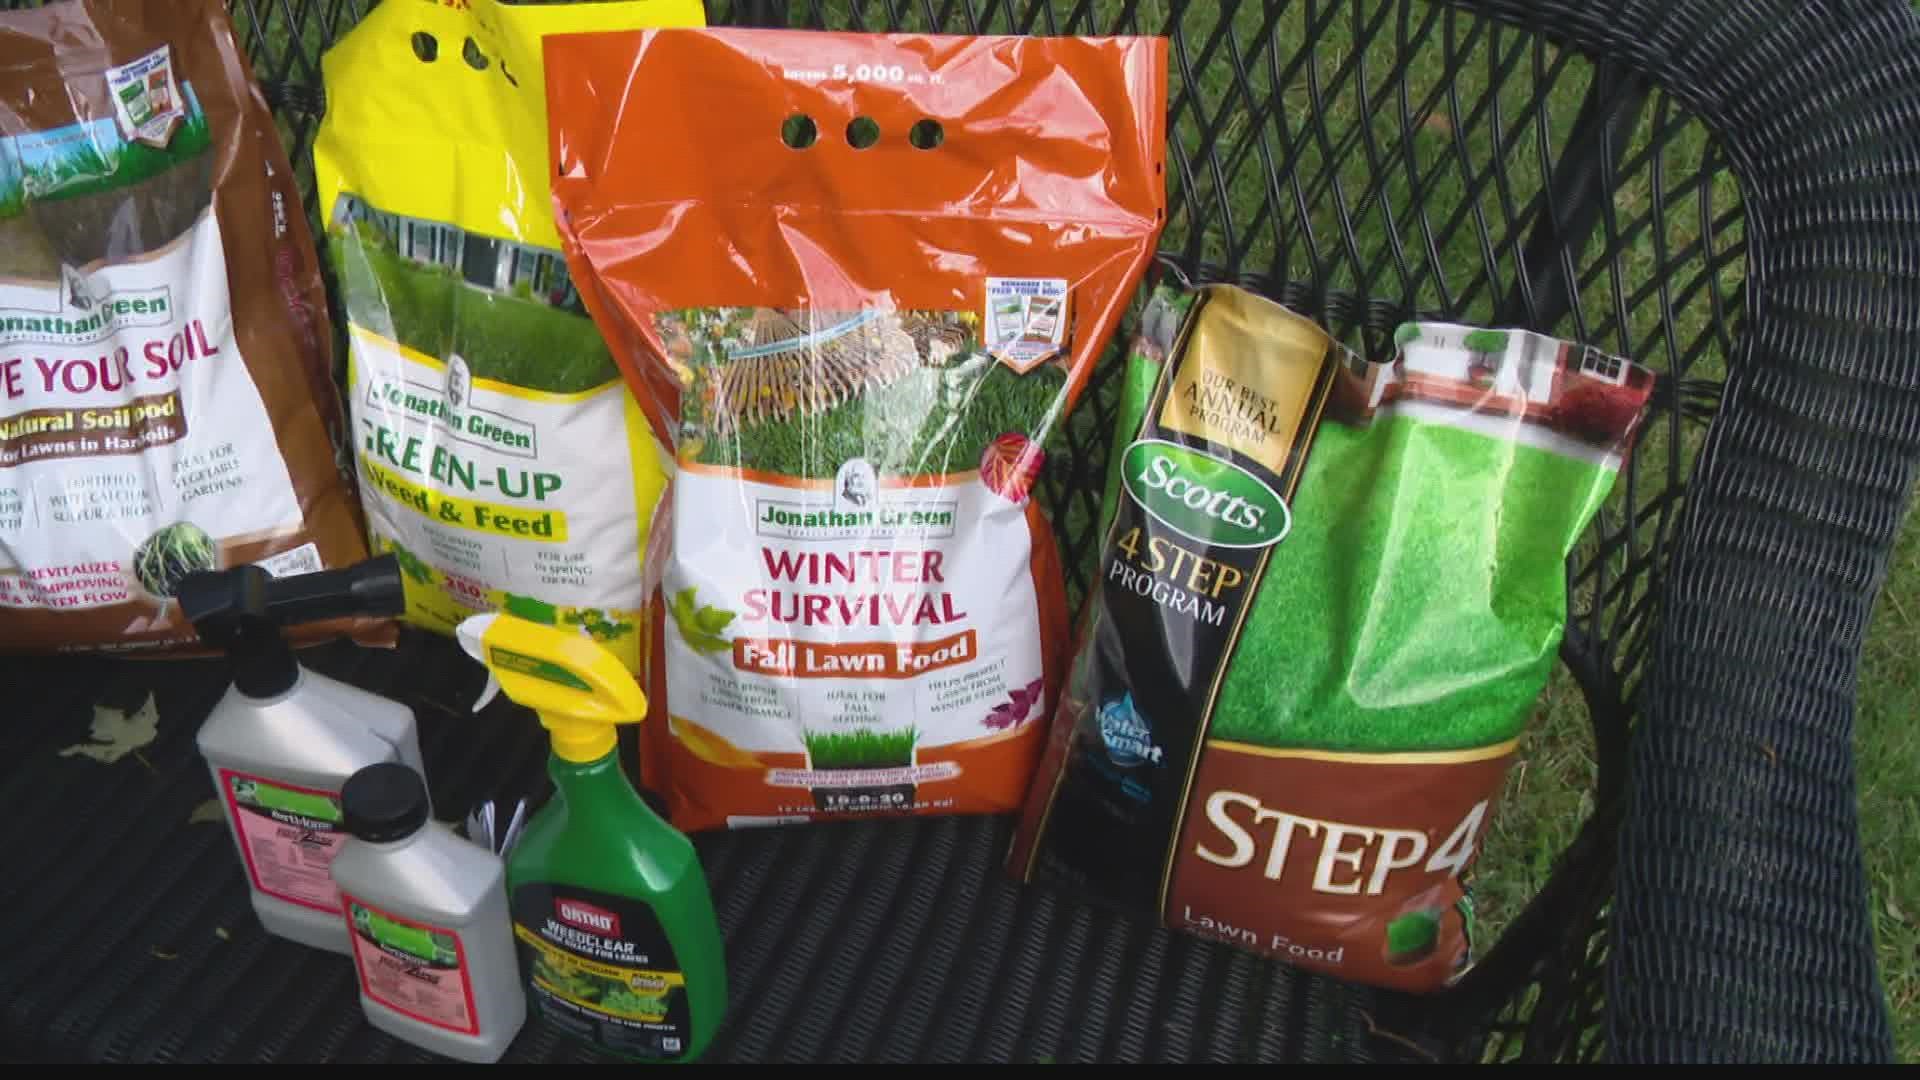 To make your yard come back strong next spring, Pat shares his to-do list for fall lawn care.